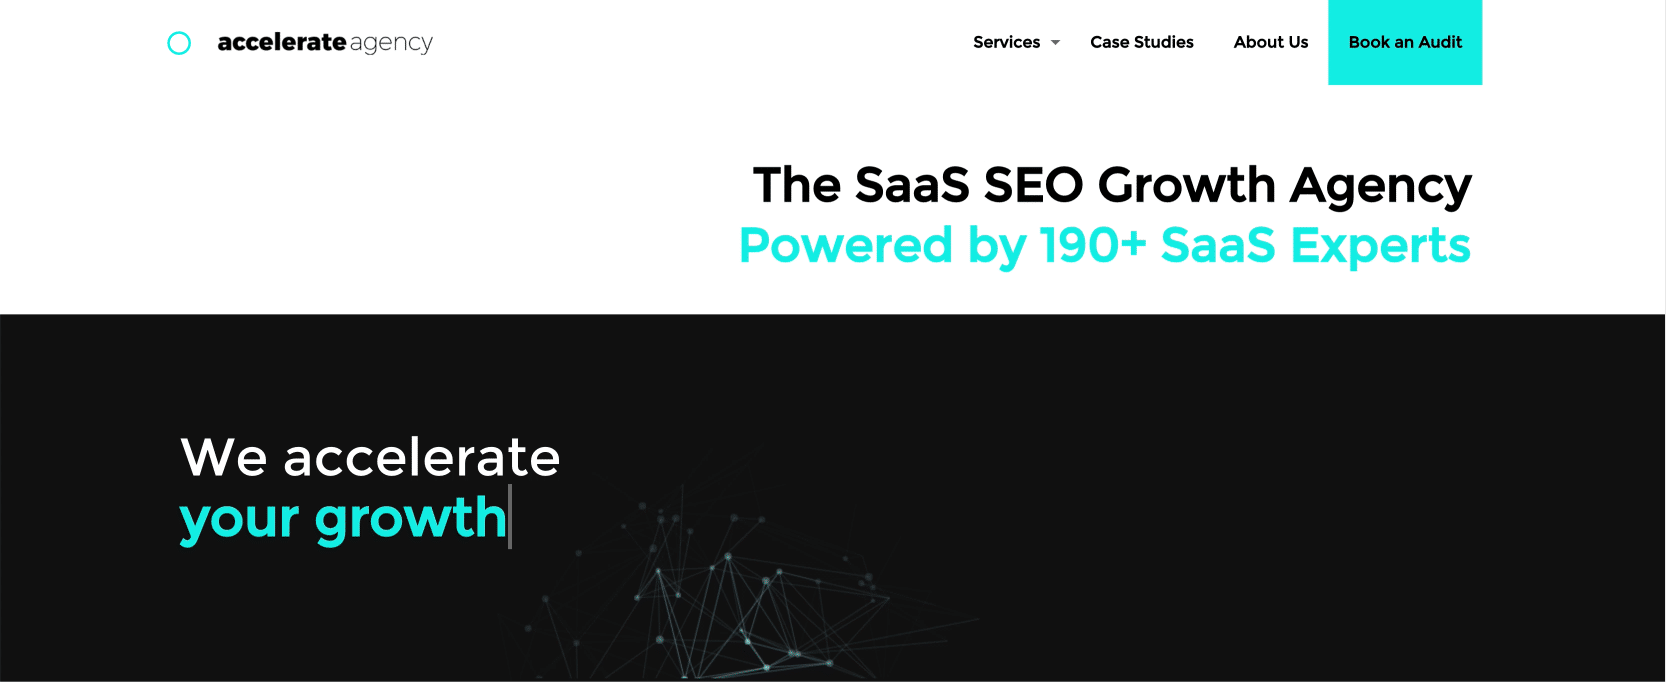 B2B SaaS marketing agency - accelerate agency home page